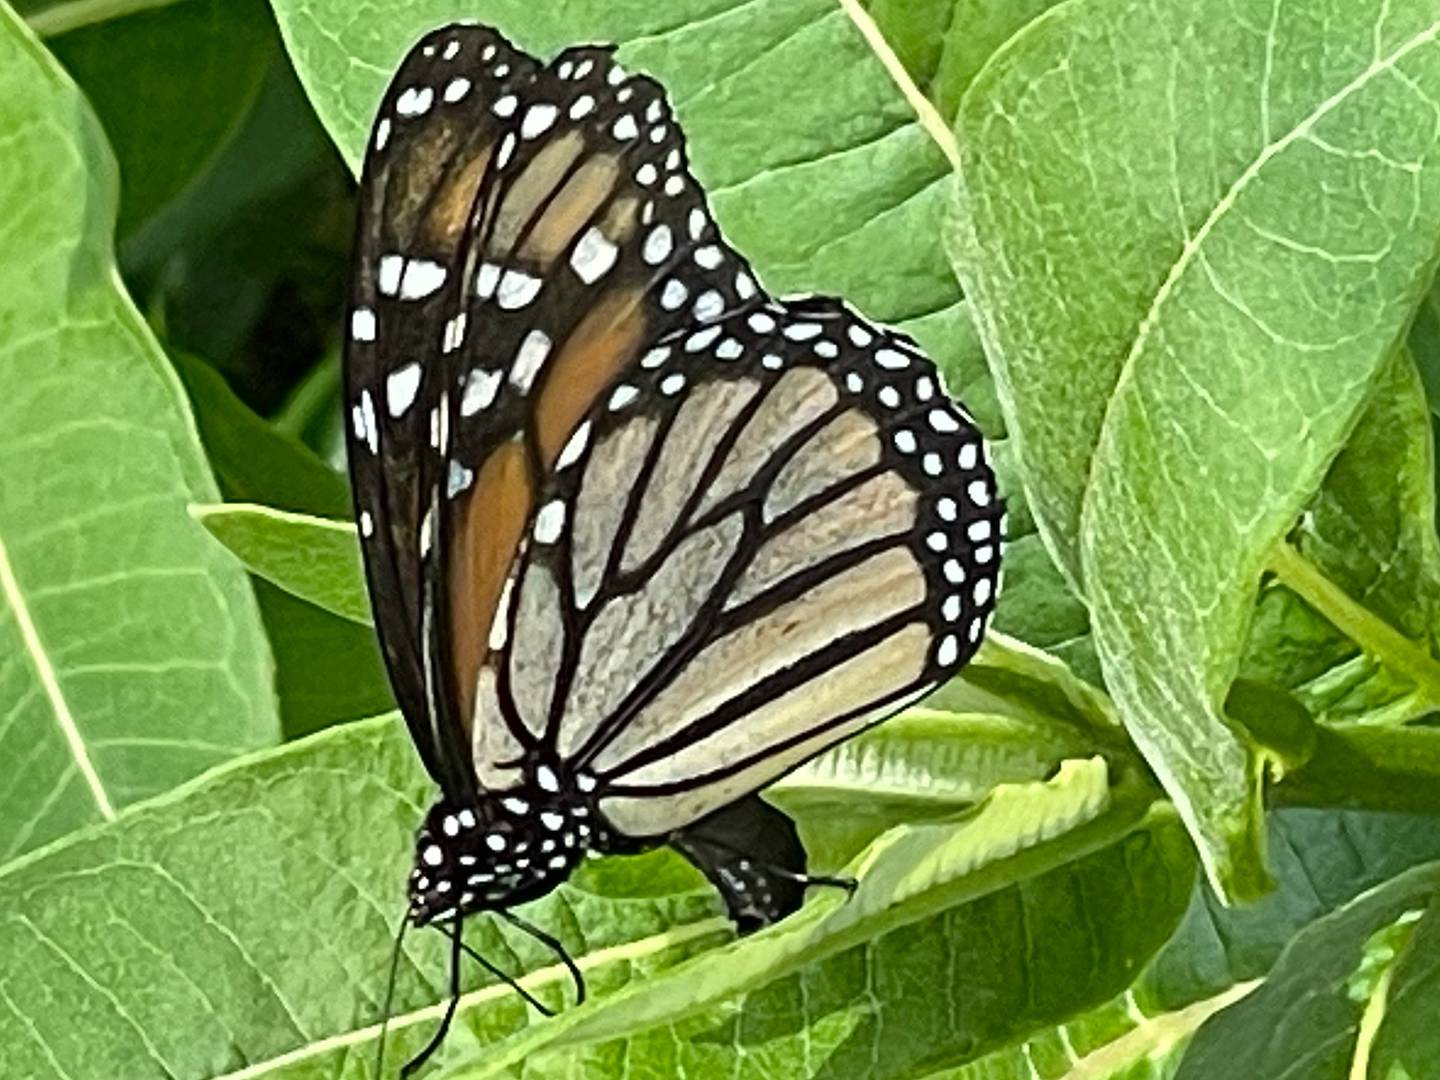 The eighth annual "Monarchs and Music" festival will take place Sunday, August 14, 2022, at Main Beach in Crystal Lake, just weeks after the migrating pollinator species was declared endangered.